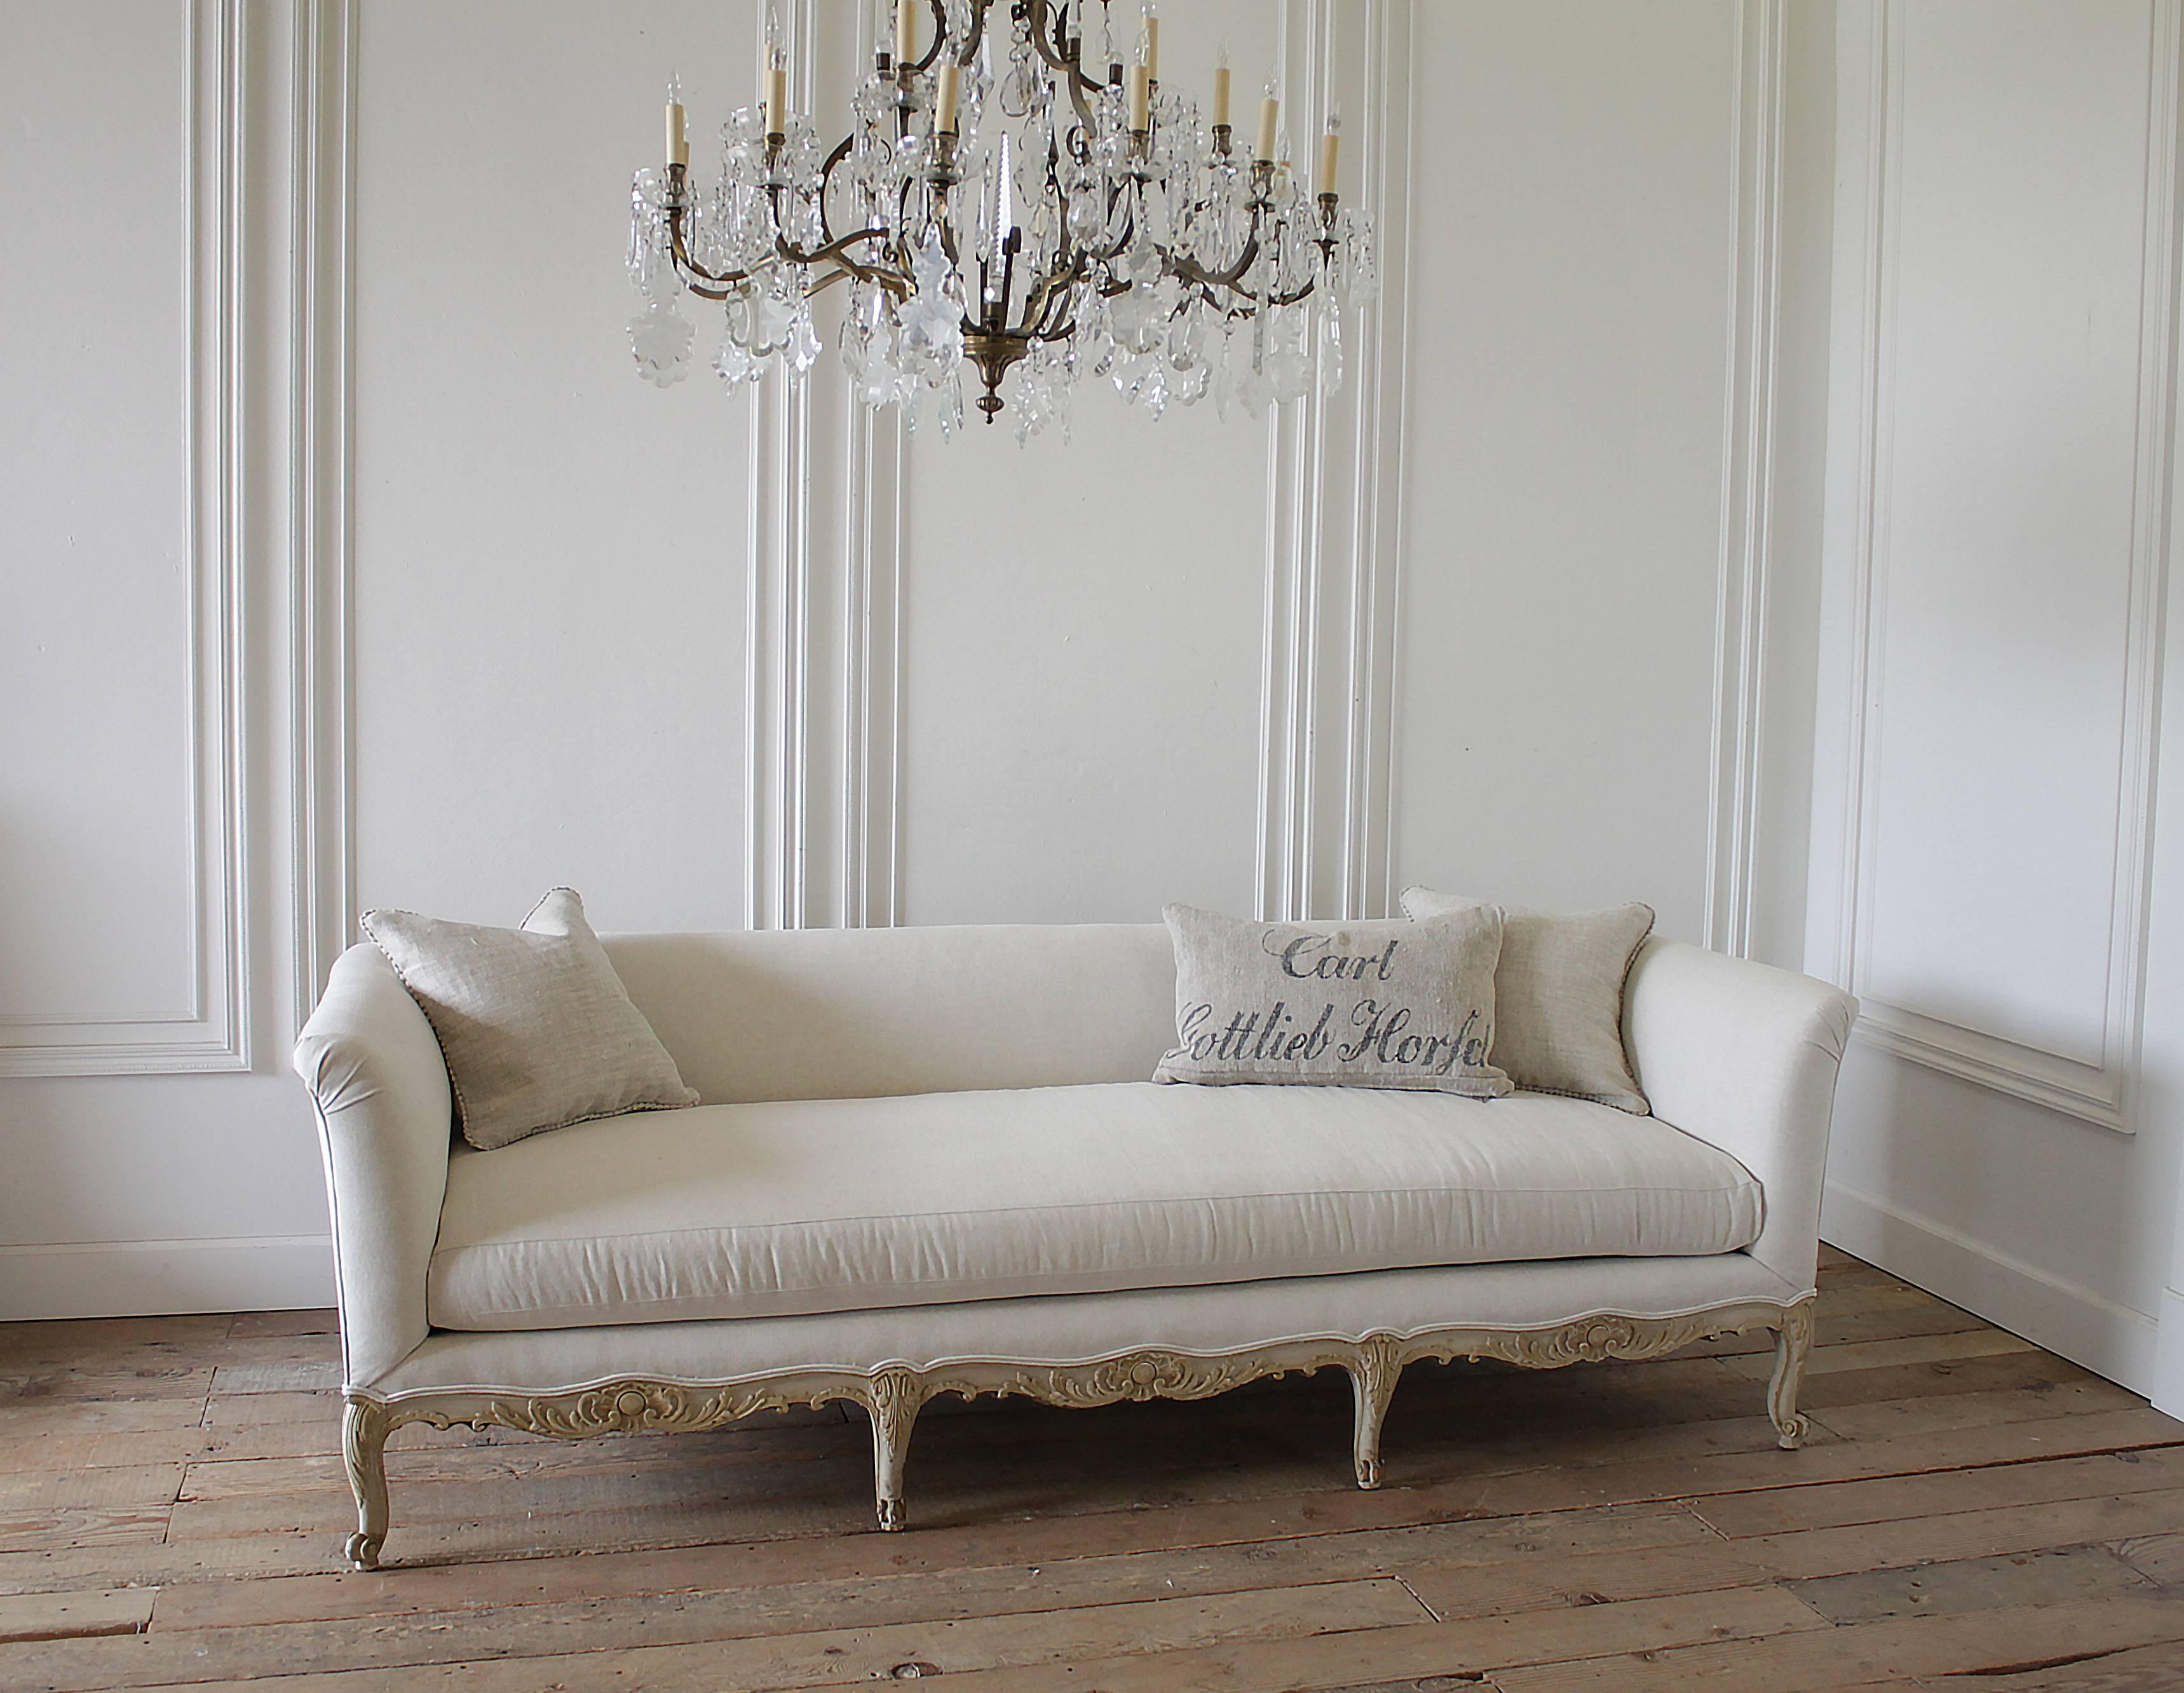 Beautiful antique sofa with Louis XV style painted legs in soft grey tone and golden linen colored highlights. Slightly distressed with wood tones peeking through the vintage patina paint. We have reupholstered this in our 100% pure Belgian organic